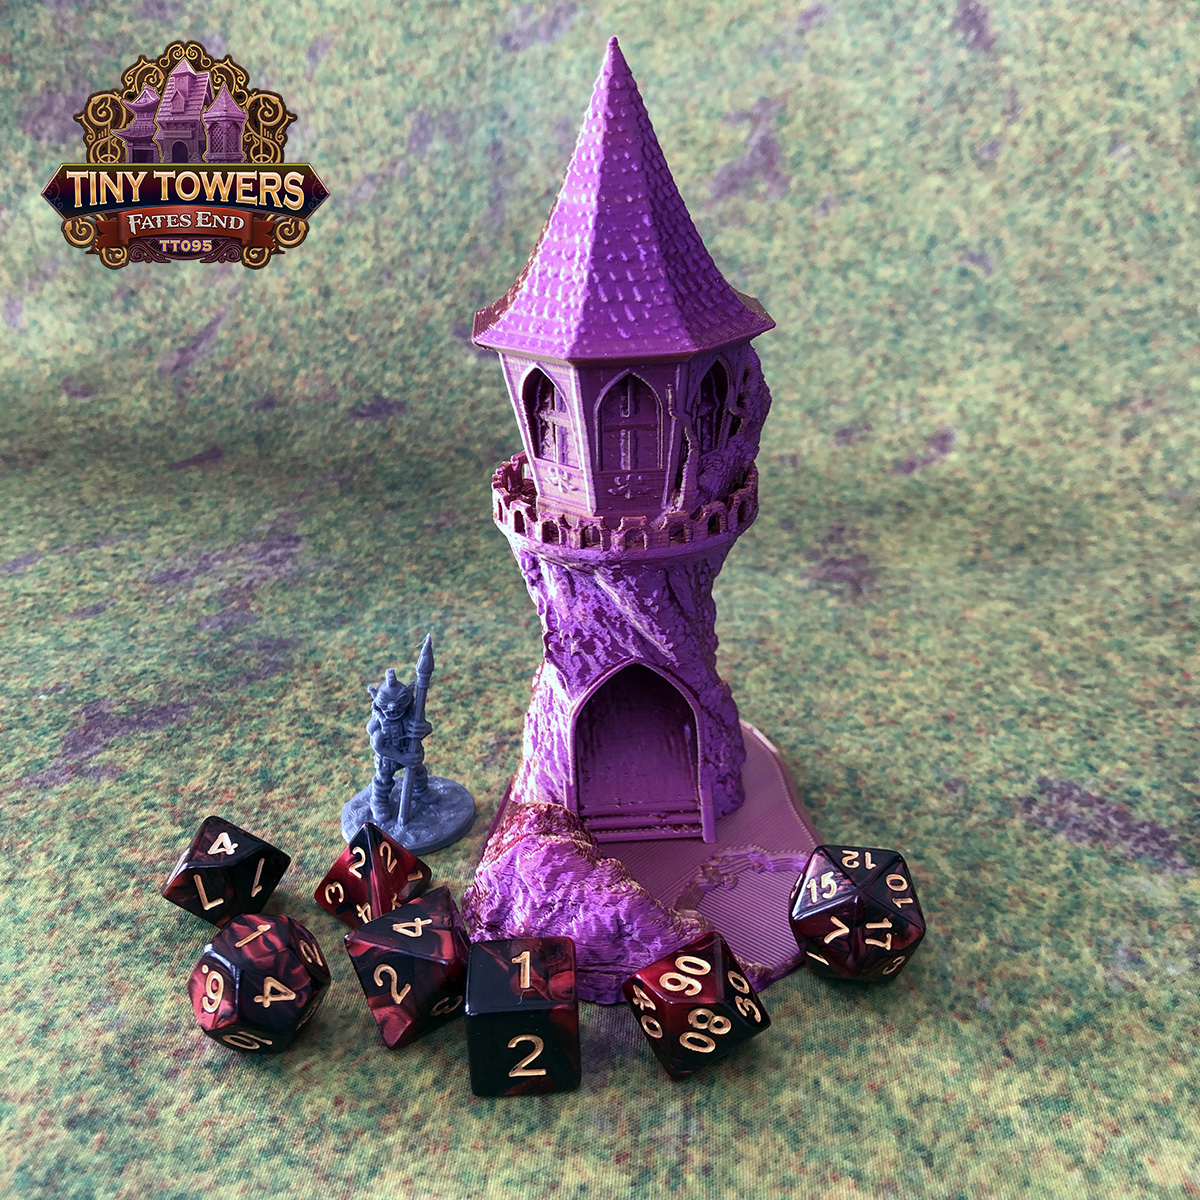 Tiny Towers Fae Villa Dice Tower by
@FatesEndGames

From $15🇨🇦 ships to 🇨🇦 & 🇺🇸

links in bio @BrentsWorkbench 

#3dprinted #fatesend #tinytowers #faevilla #dicetower #dice #rpg #ttrpg #dnd #dungeonsanddragons #tabletoprpg #tabletopgaming #wargaming #warhammer #dungeonmaster